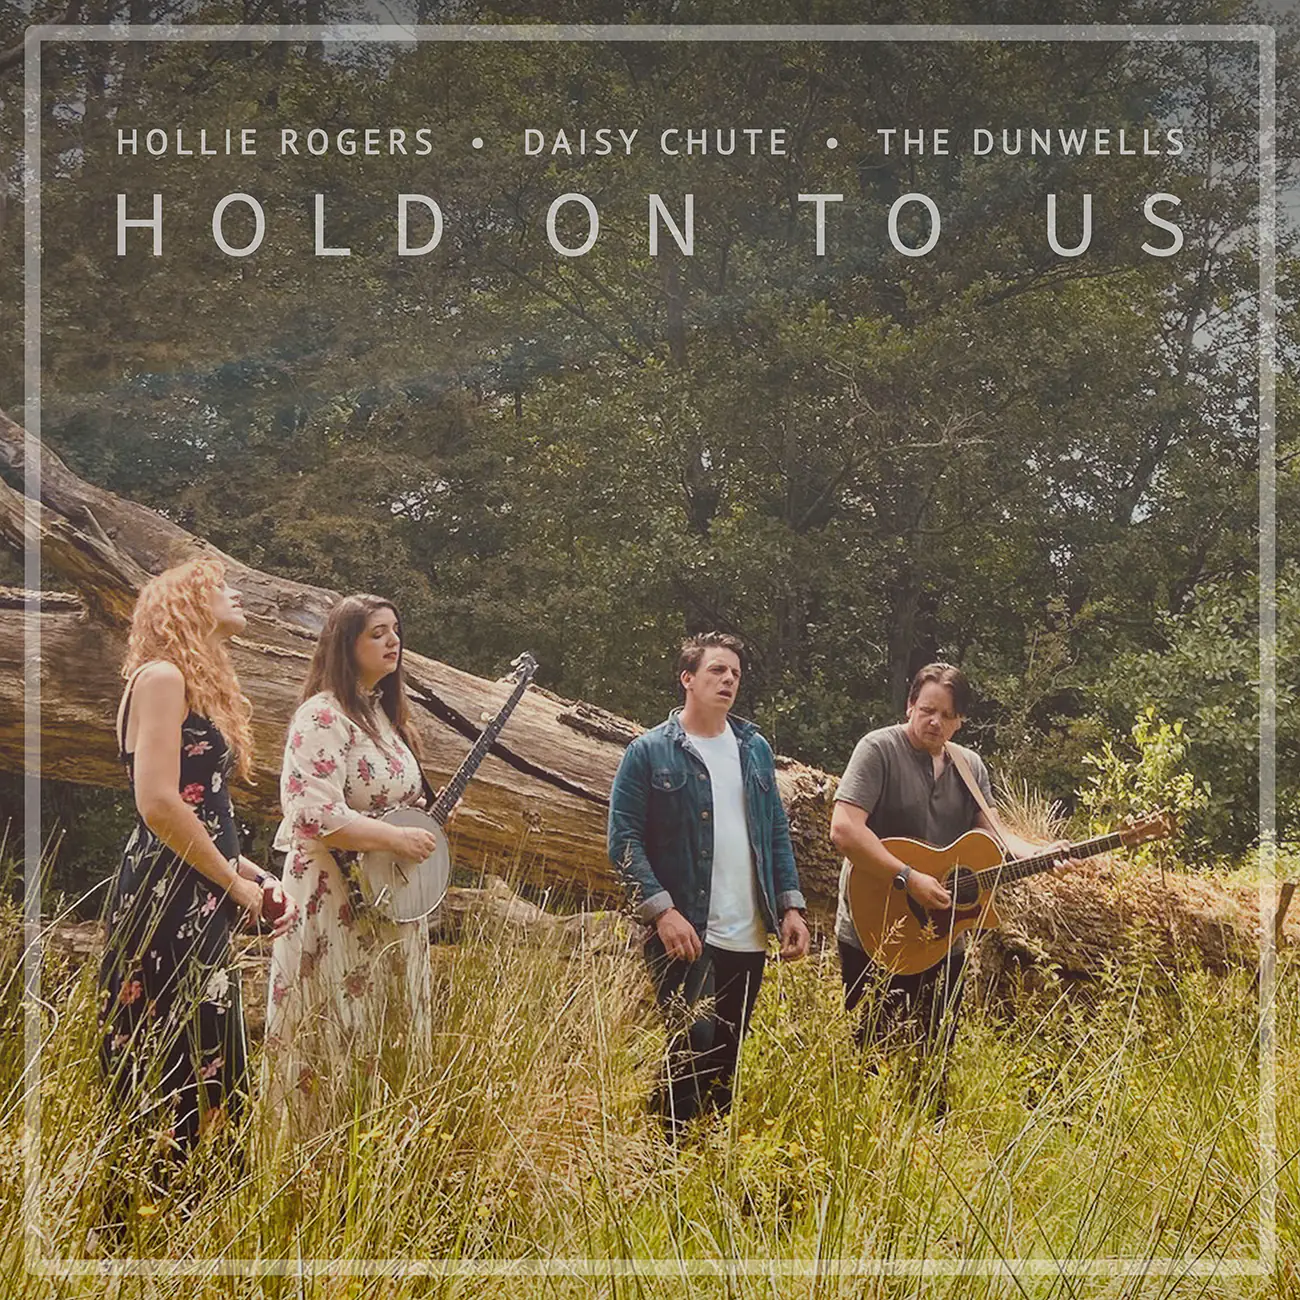 VIDEO PREMIERE: Daisy Chute, Hollie Rogers & The Dunwells – Hold On To Us